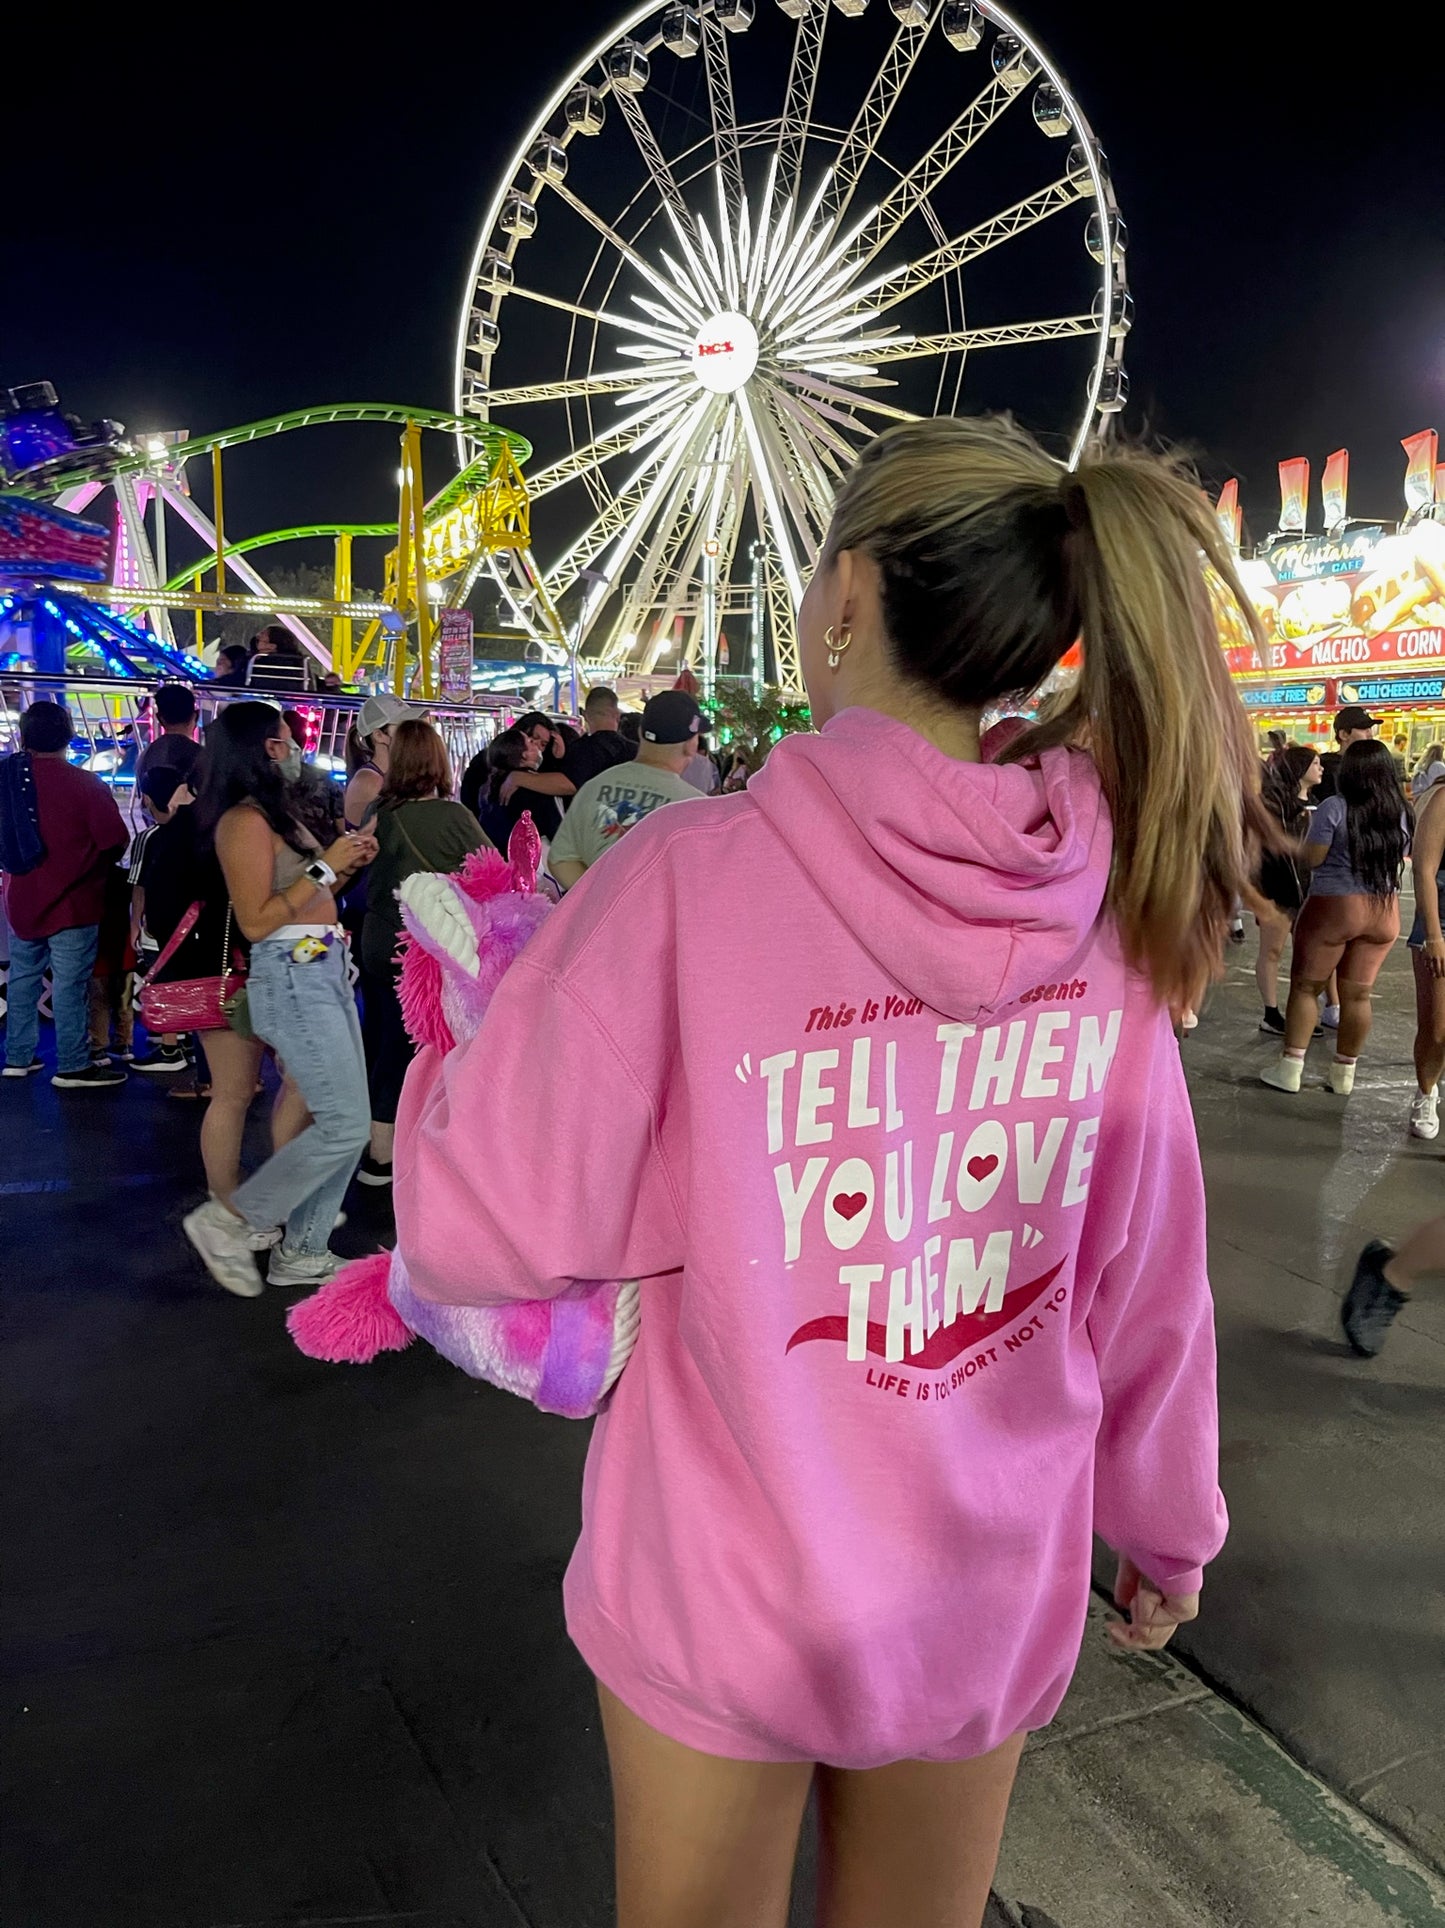 TELL THEM YOU LOVE THEM hoodie (pink)